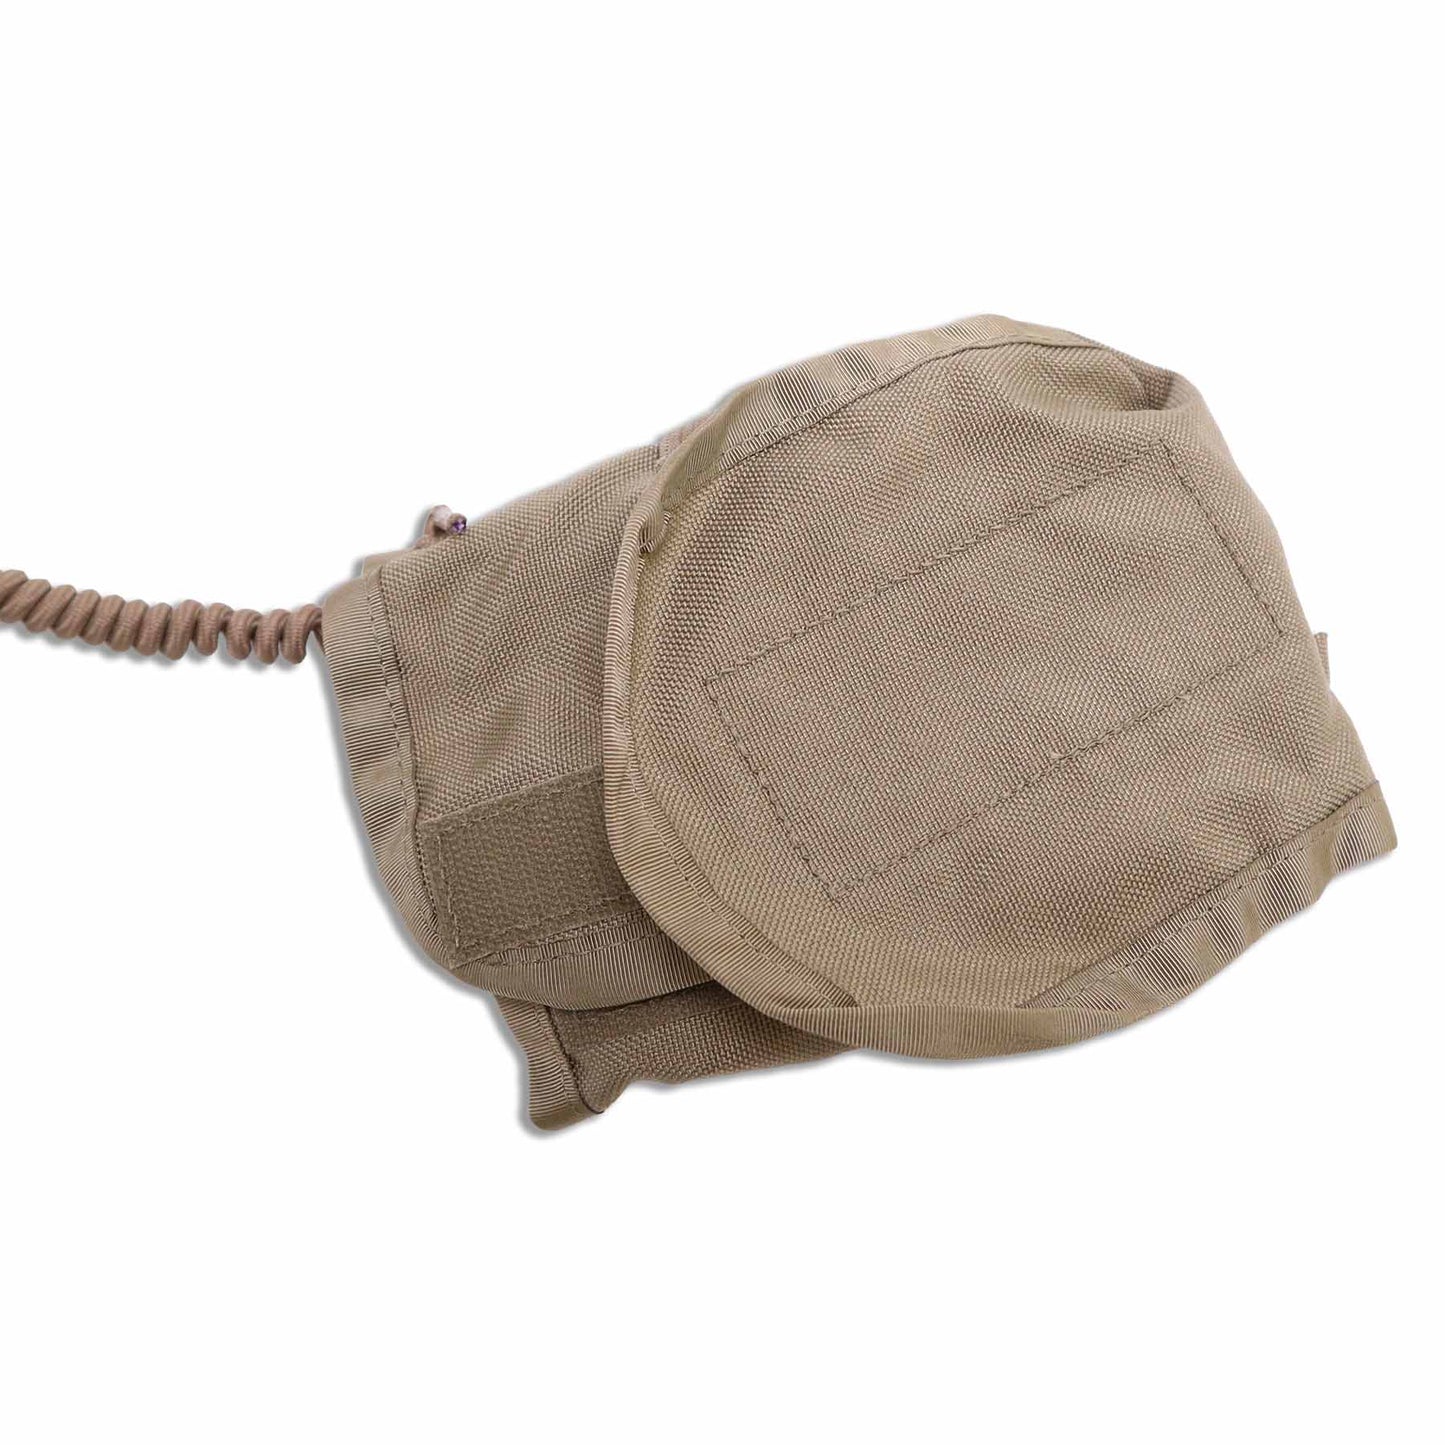 USGI US Army MOLLE II Individual First Aid Kit IFAK Pouch - Multicam (SURPLUS)